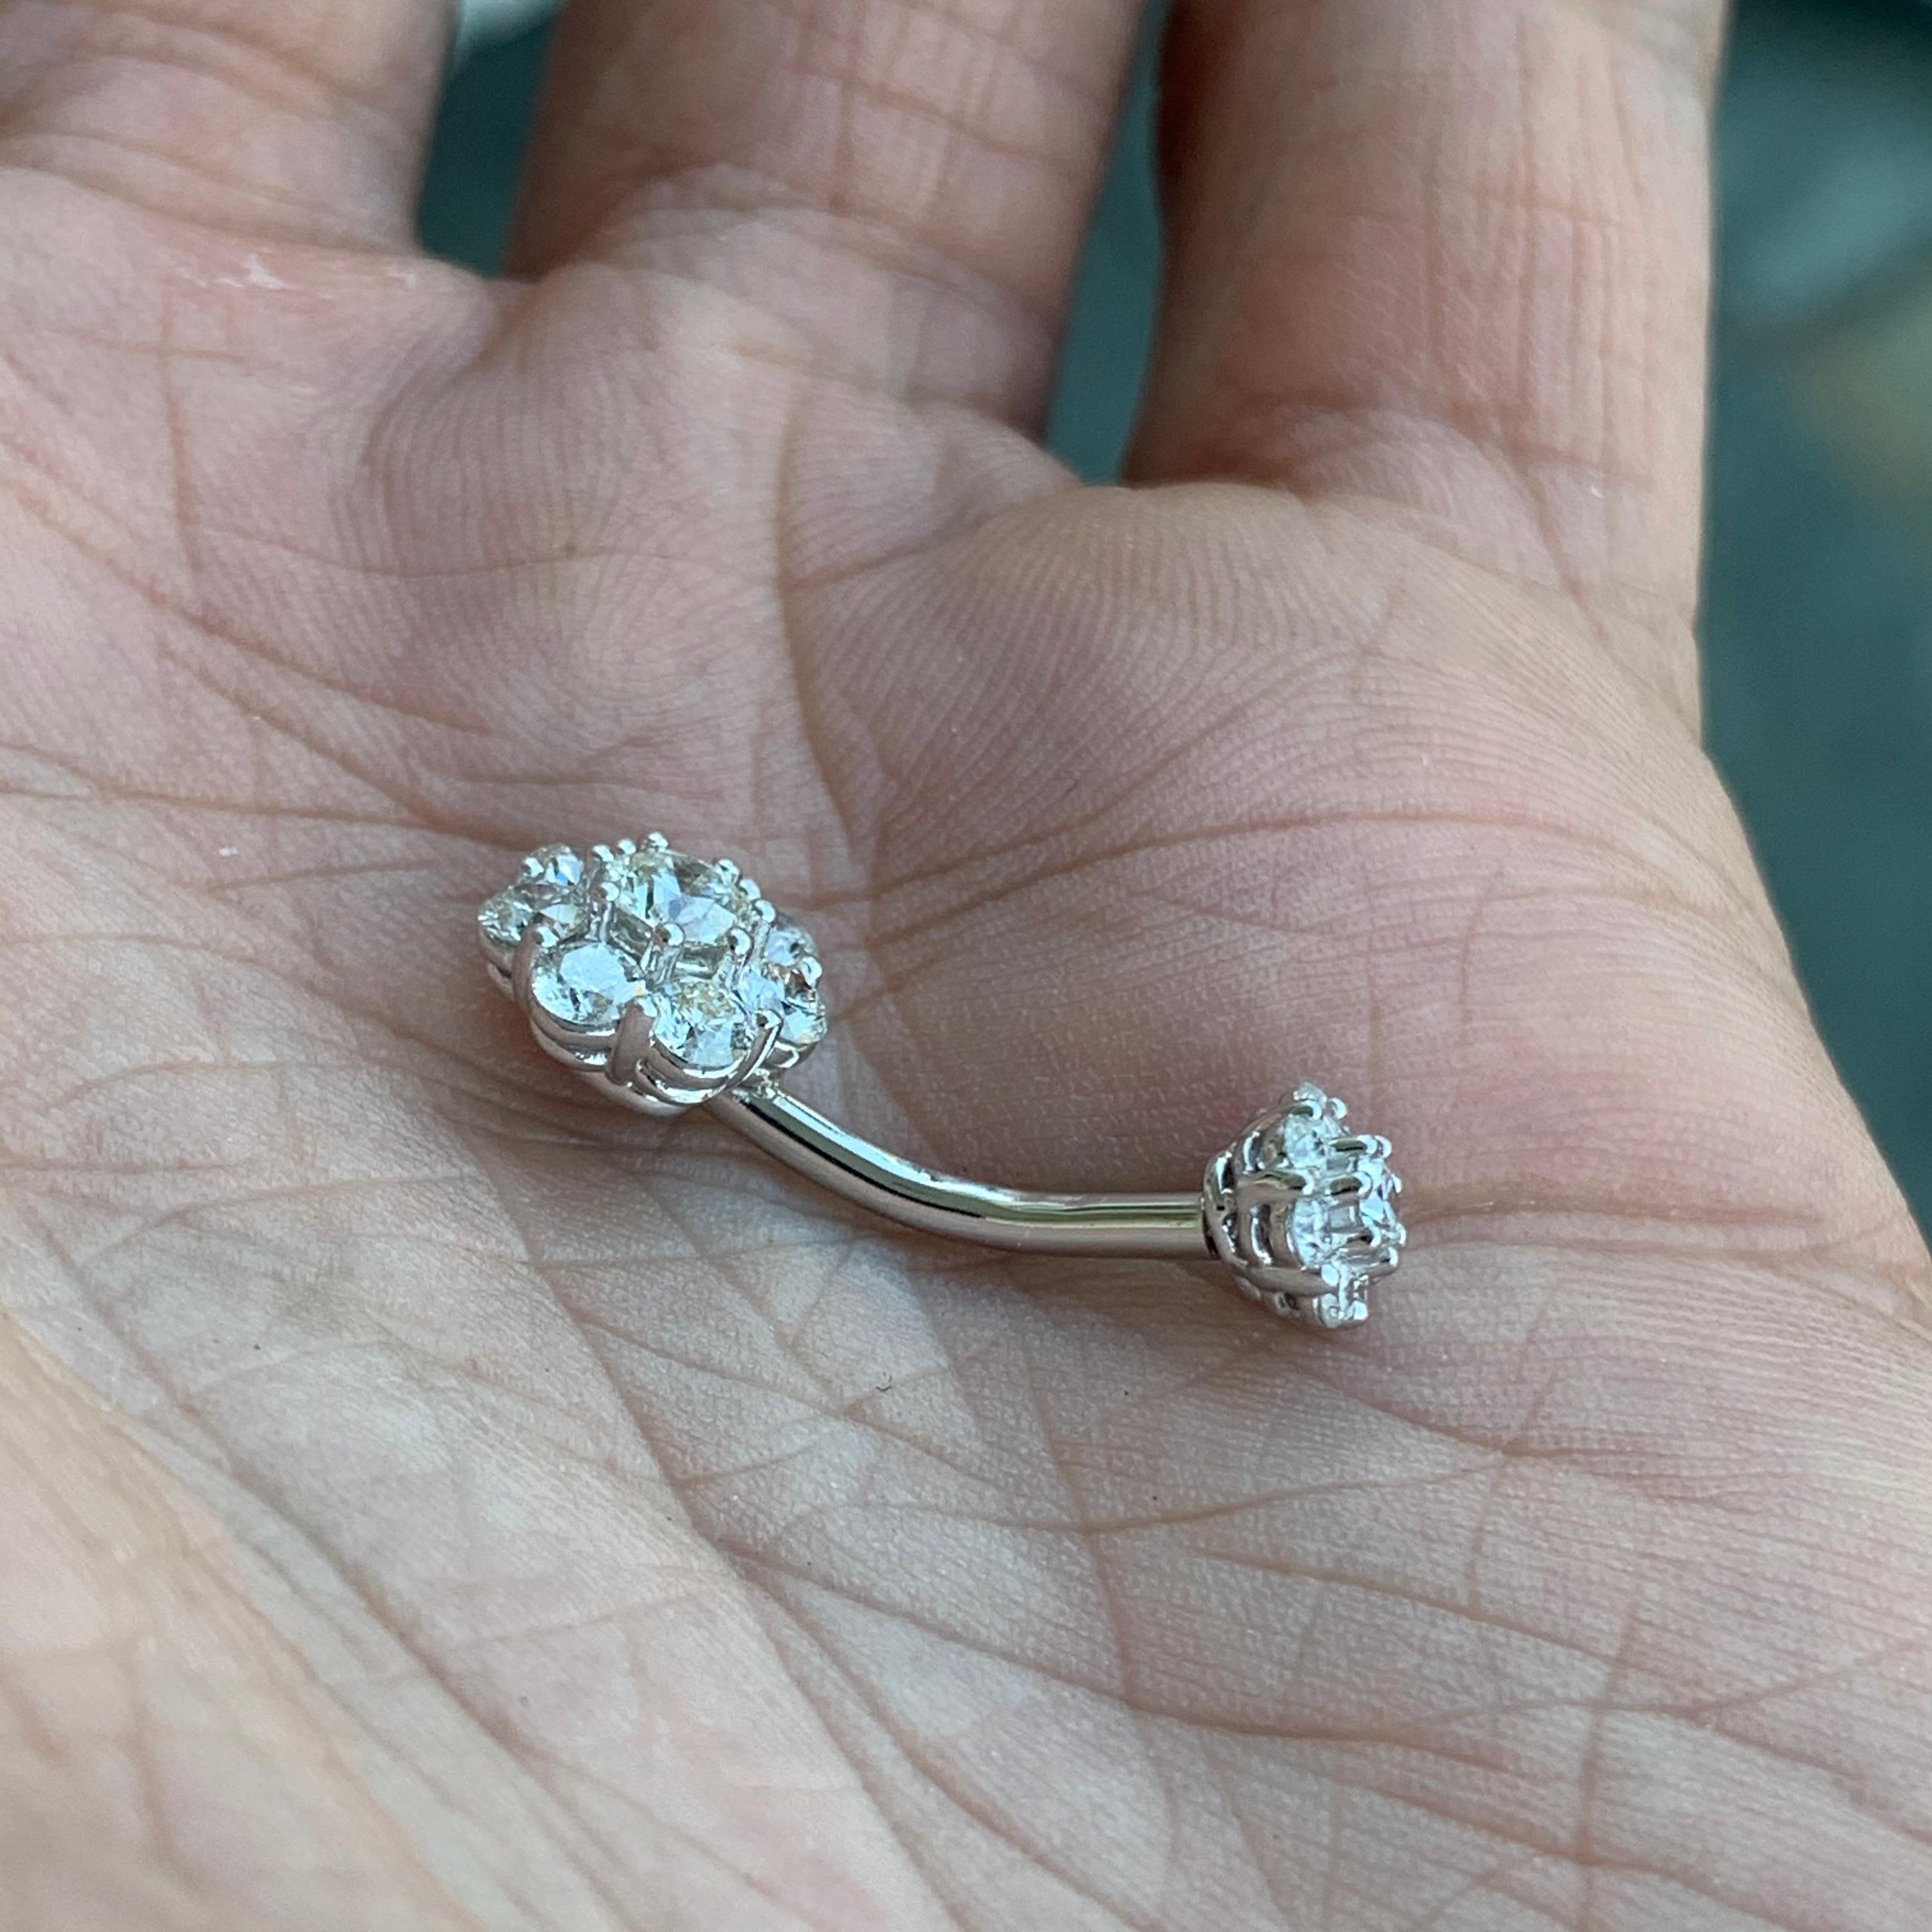 Made to order, please allow 1-3 weeks from date of final design approval by customer.  If you have a rush date you need them by let us know and we will let you know before if we can accommodate you.

Diamond Belly Button Ring but could also be made